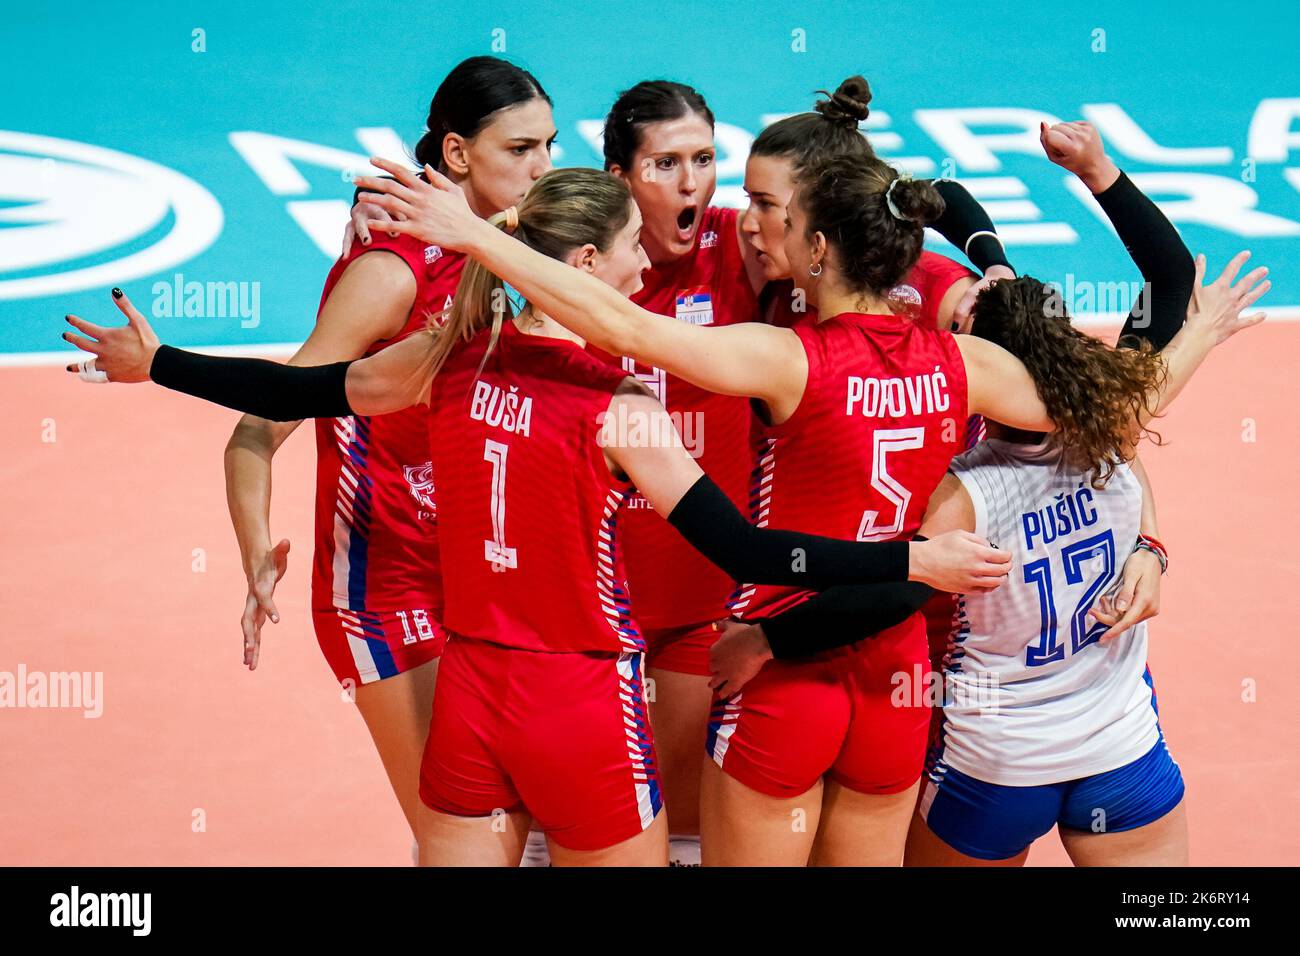 Apeldoorn, Netherlands. 15th Oct, 2022. APELDOORN, NETHERLANDS - OCTOBER 15: Bianka Busa of Serbia, Tijana Boskovic of Serbia and Bojana Drca of Serbia celebrate a point with their team mates during the Final match between Brazil and Serbia on Day 20 of the FIVB Volleyball Womens World Championship 2022 at the Omnisport Apeldoorn on October 15, 2022 in Apeldoorn, Netherlands (Photo by Rene Nijhuis/Orange Pictures) Credit: Orange Pics BV/Alamy Live News Stock Photo